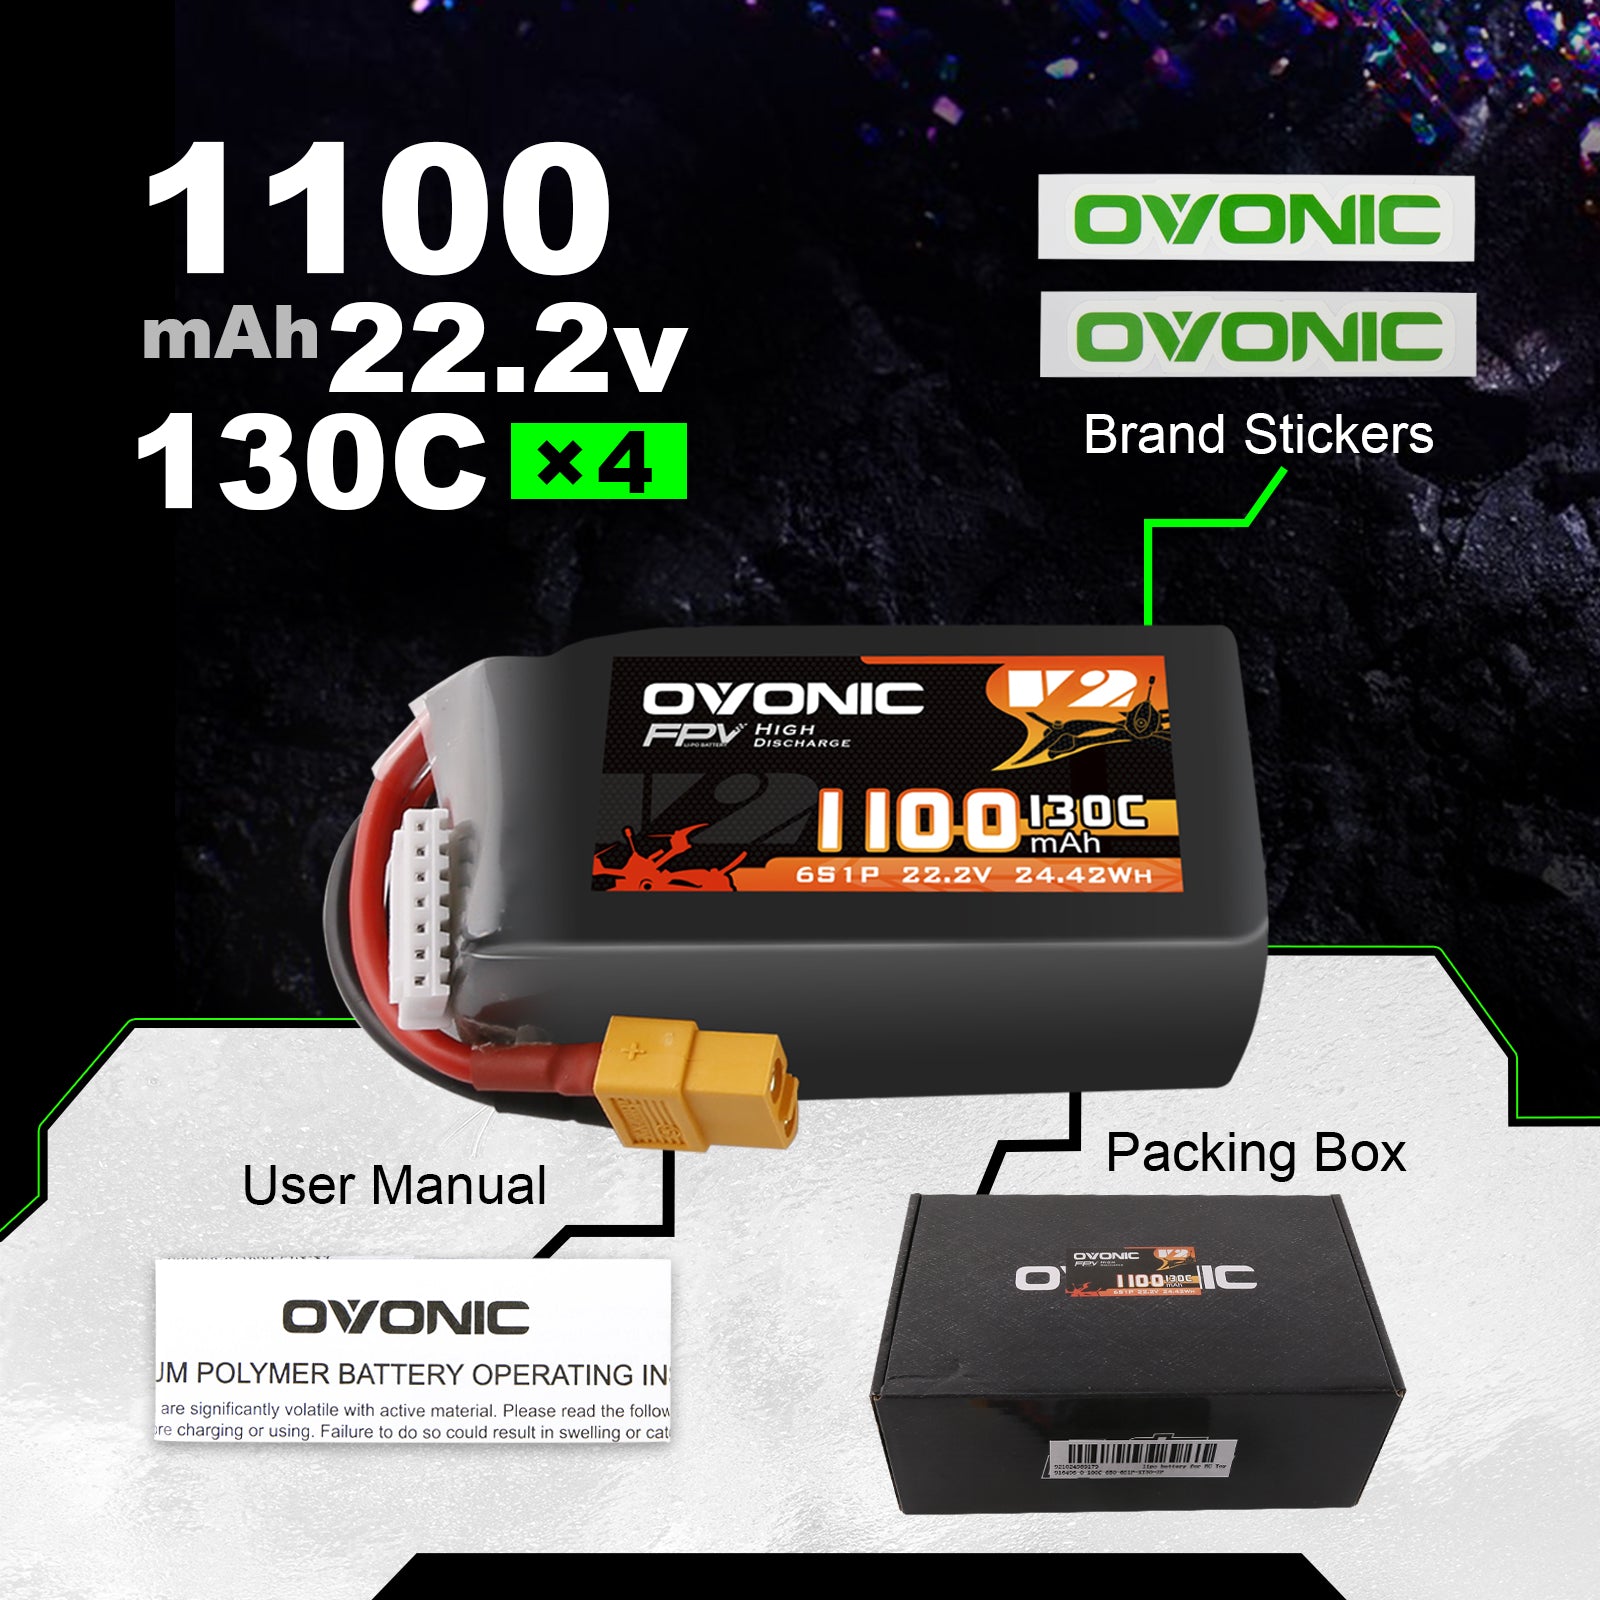 4x Ovonic 130C 6S 1100mah Lipo Battery 22.2V Pack with XT60 Plug for FPV Racing